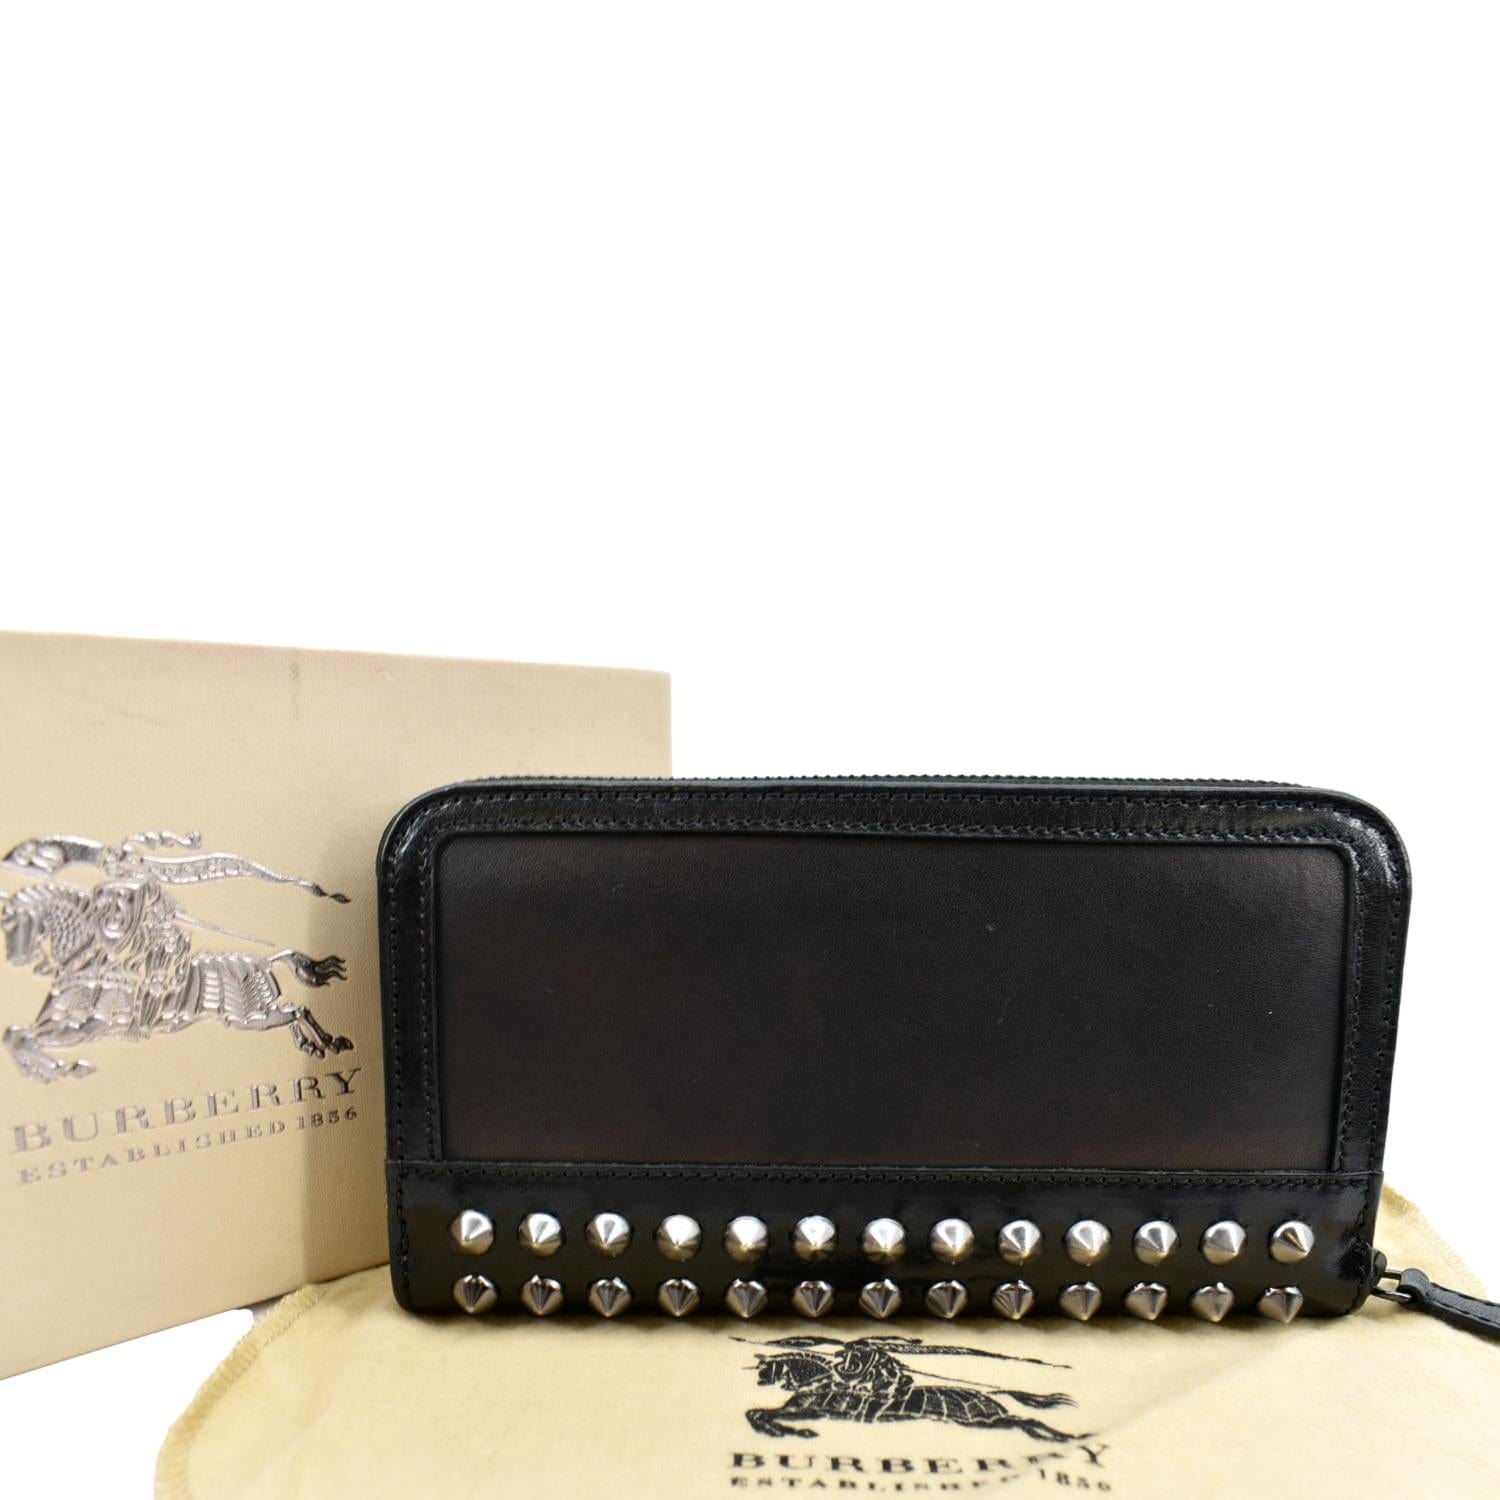 Authentic Burberry black studded wallet